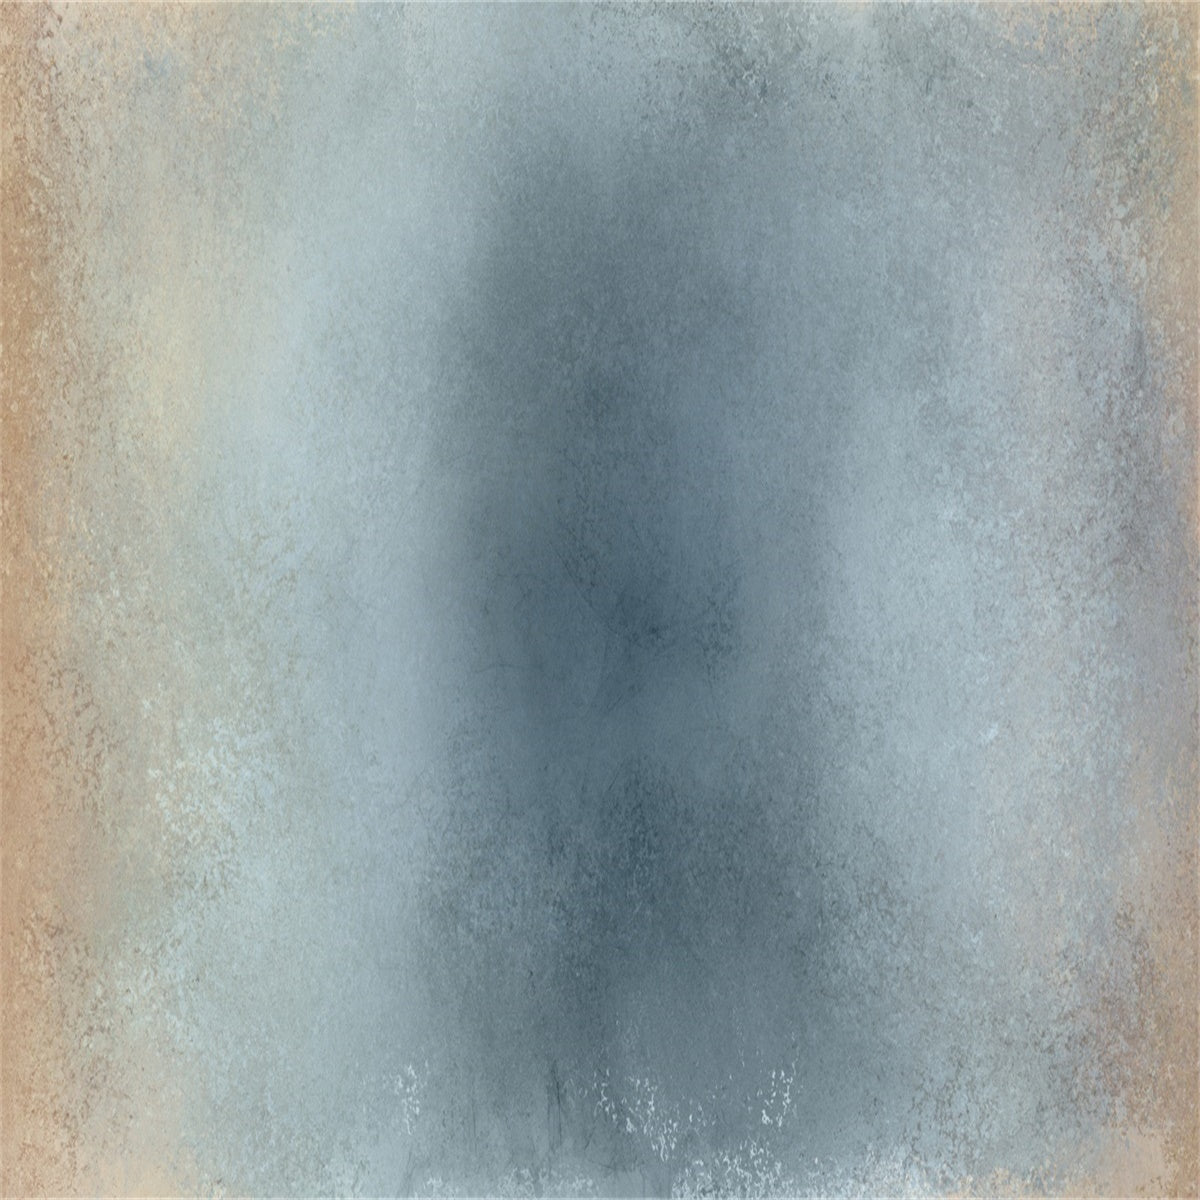 Vintage Rustic Blue Abstract Photo Backdrops